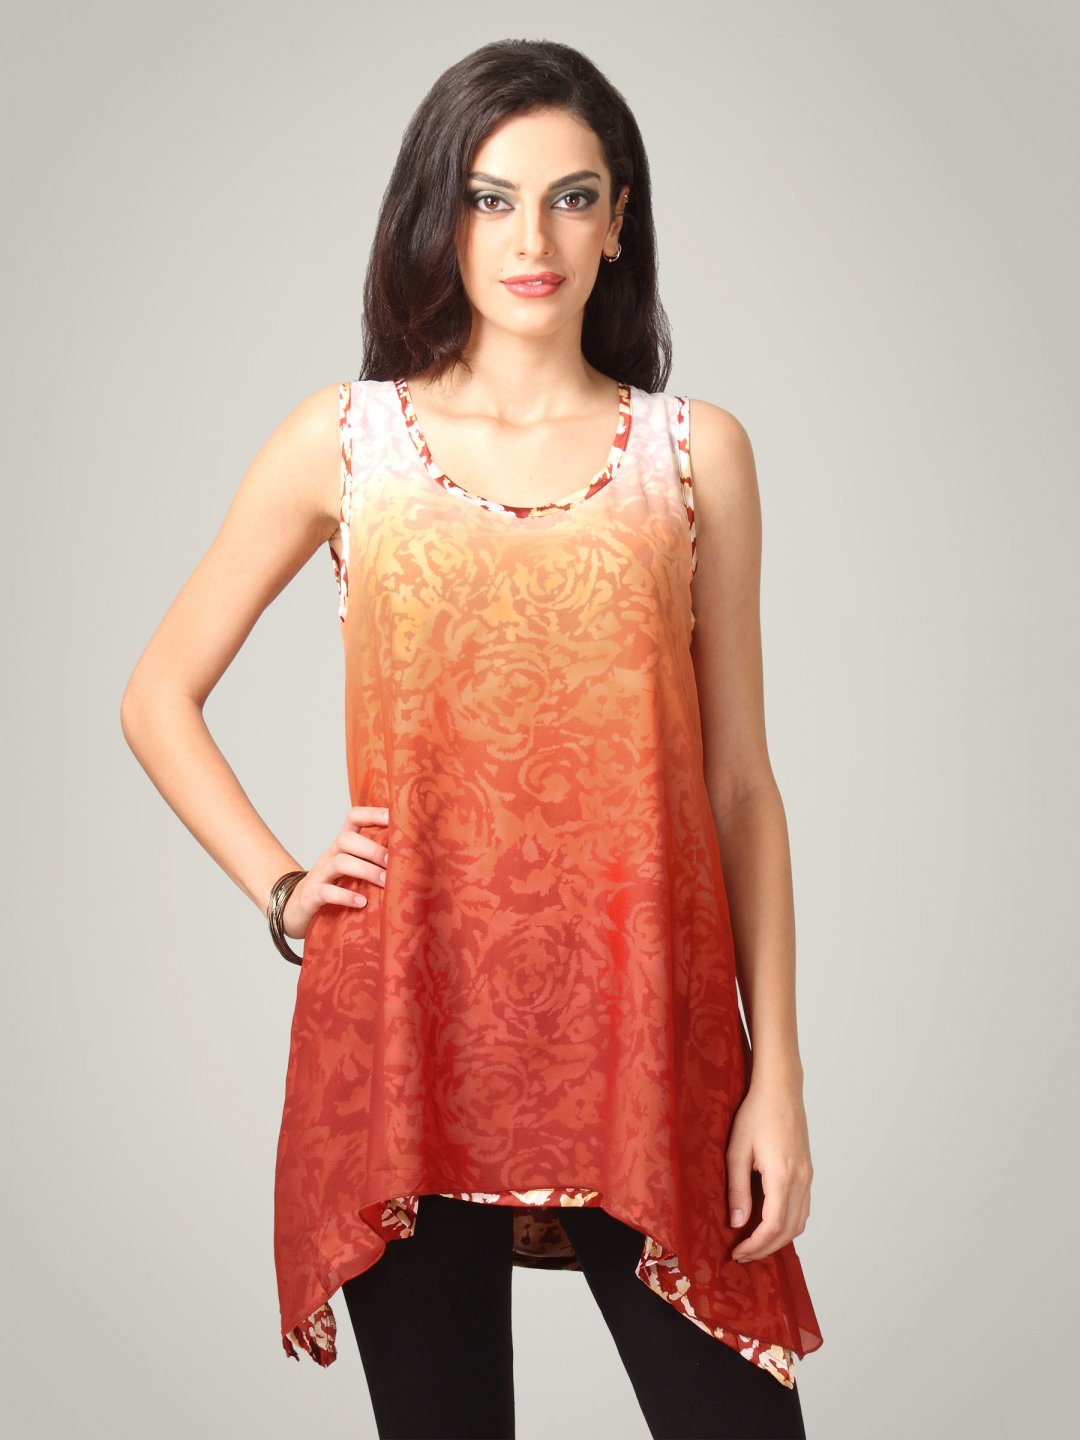 Latest Saree Fashion: Scullers For Her Women's Layered Tunics Brown Top